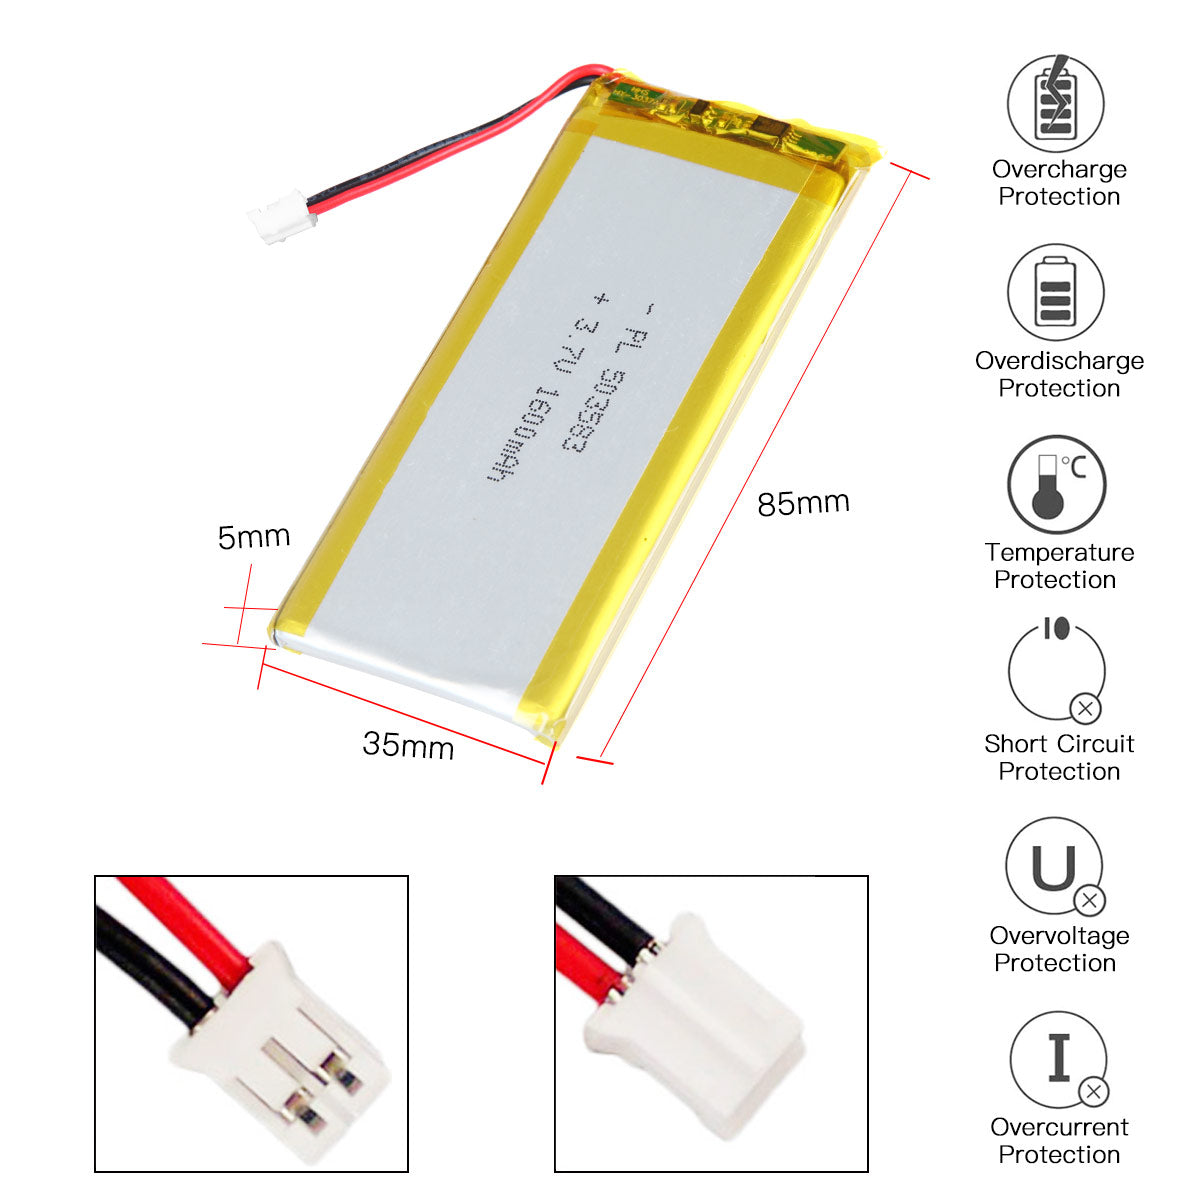 YDL 3.7V 1600mAh 503583 Rechargeable Lithium Polymer Battery Length 85mm